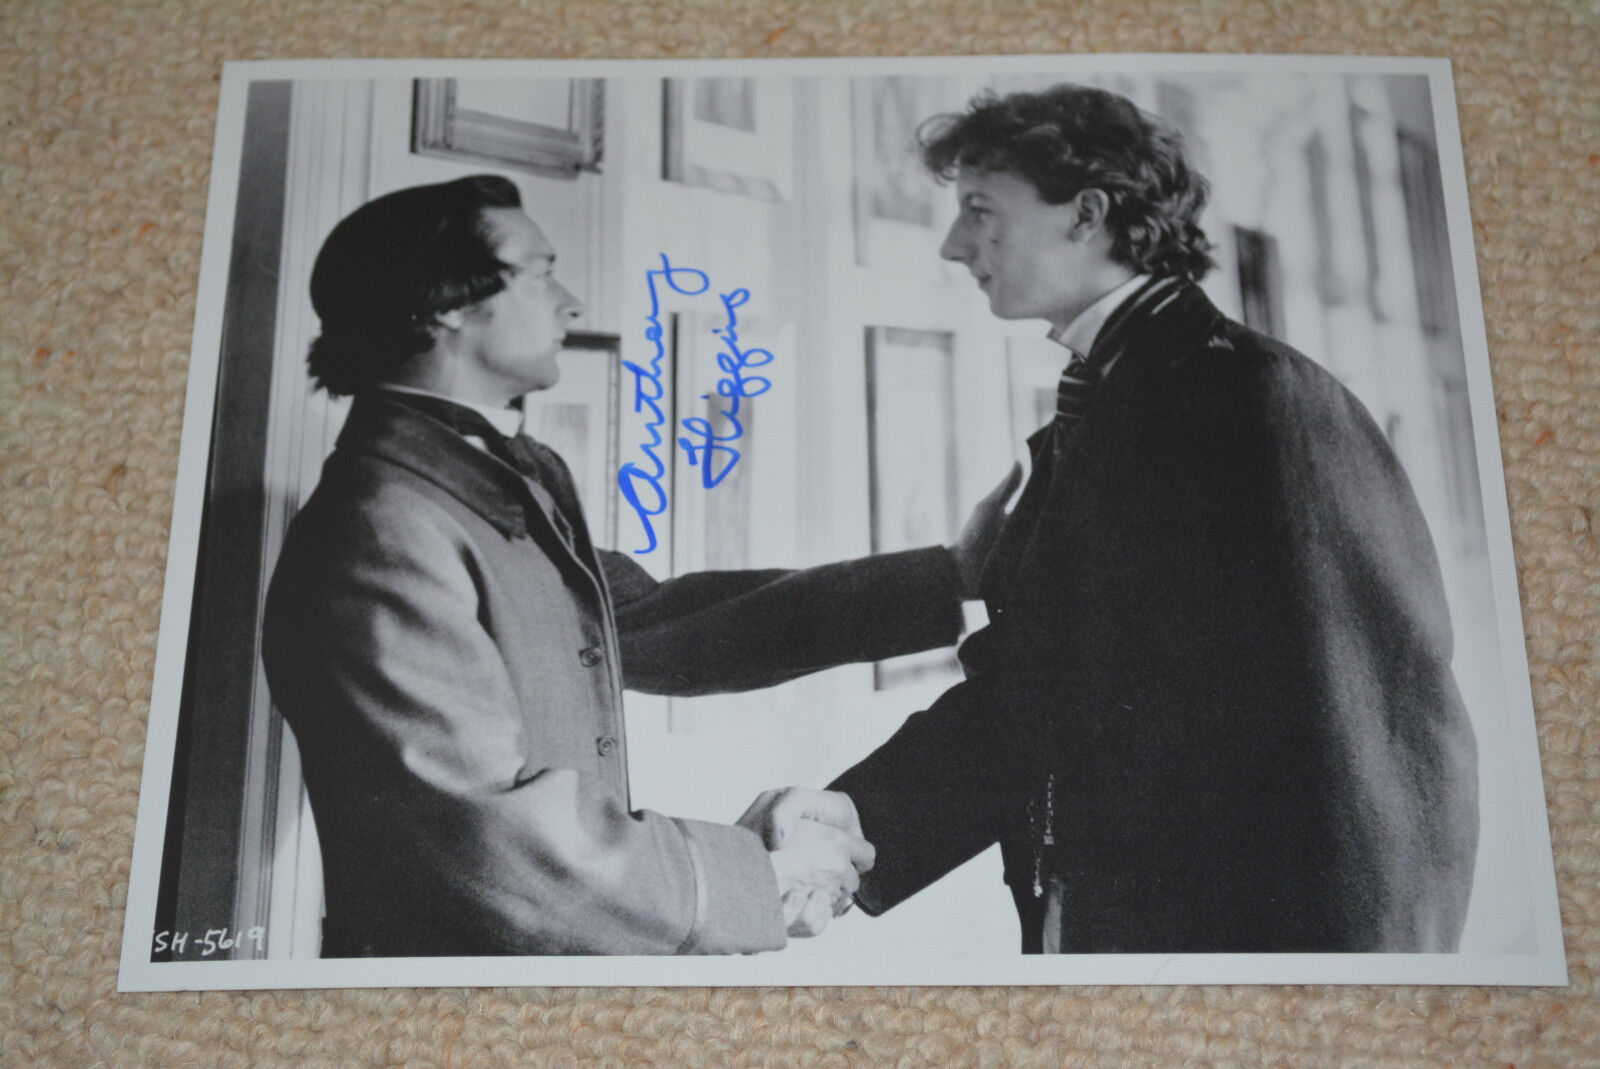 ANTHONY HIGGINS signed autograph In Person 8x10 (20x25 cm) YOUNG SHERLOCK HOLMES